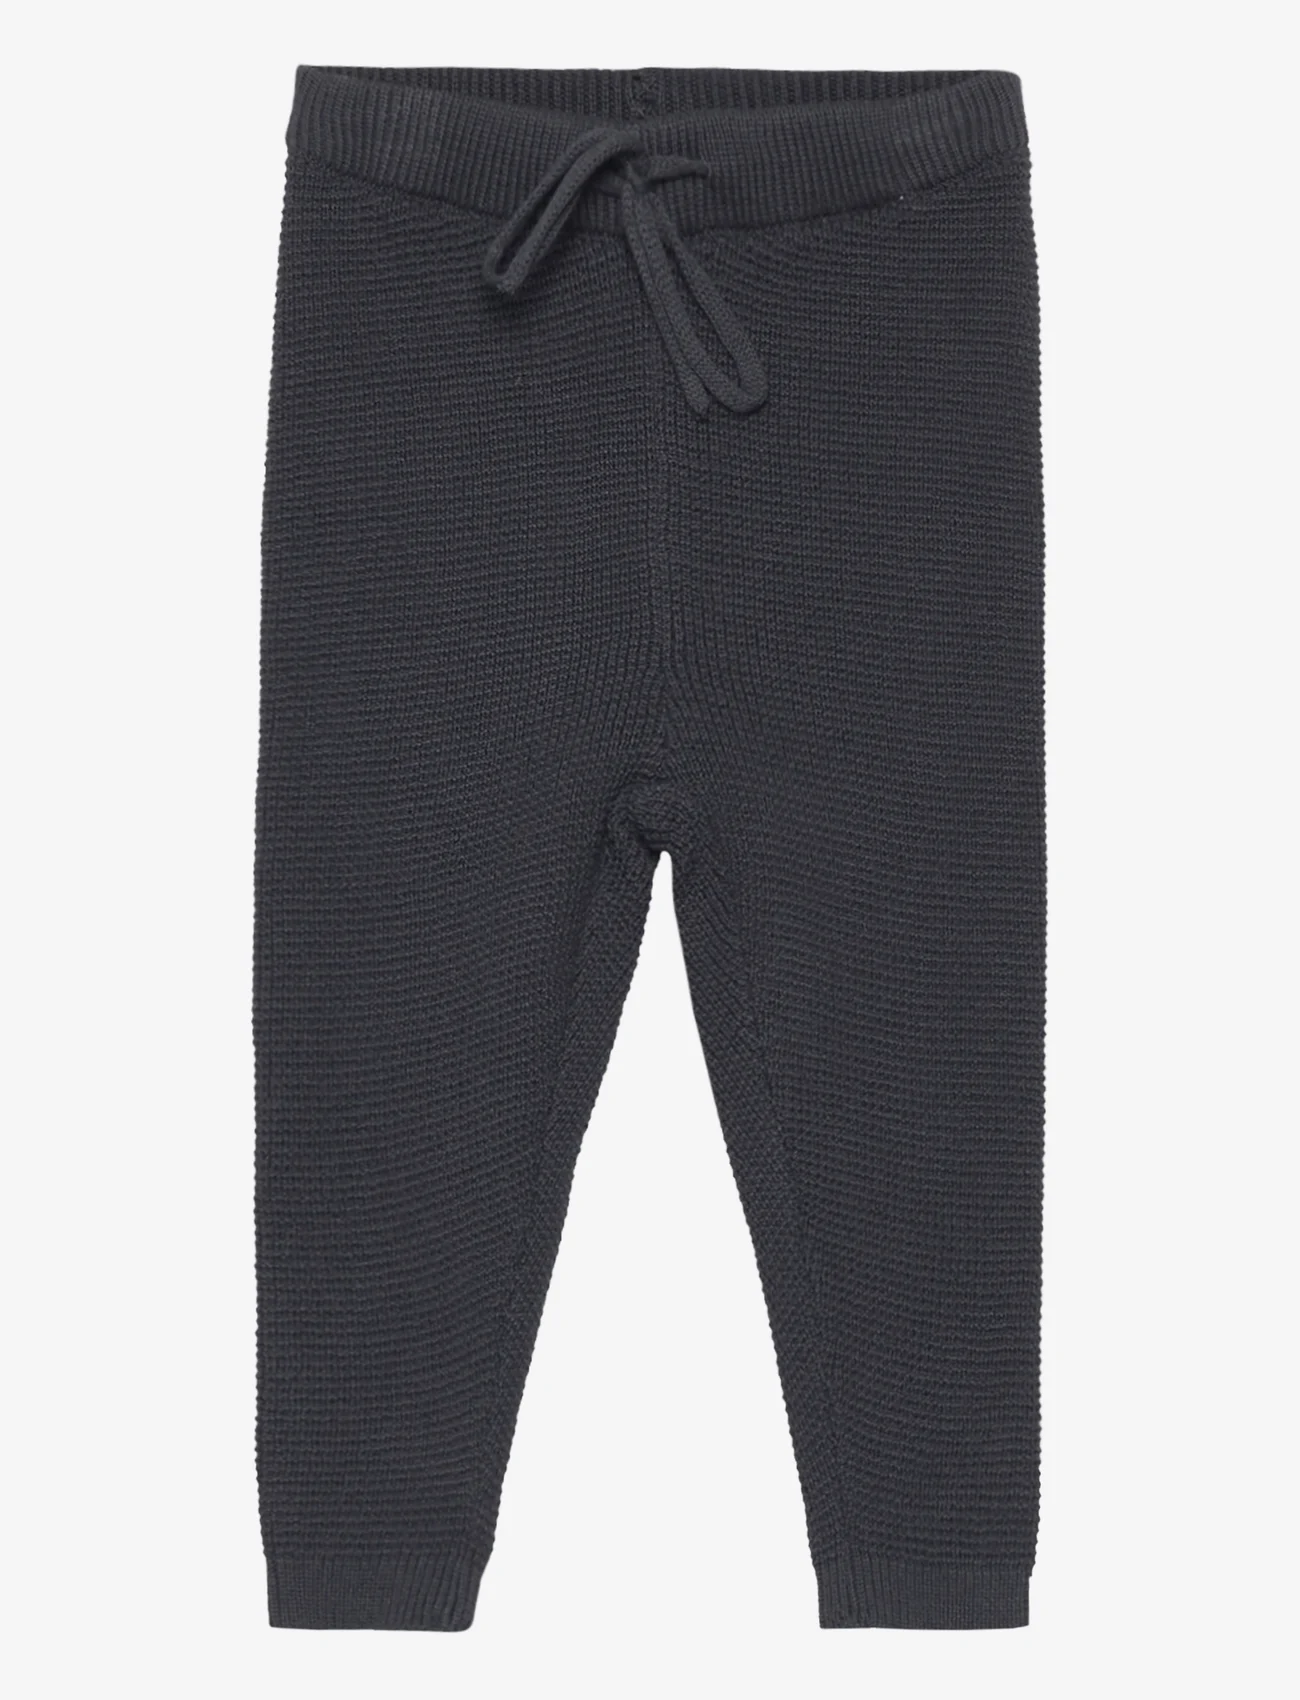 Müsli by Green Cotton - Knit pants baby - trousers - night blue - 0